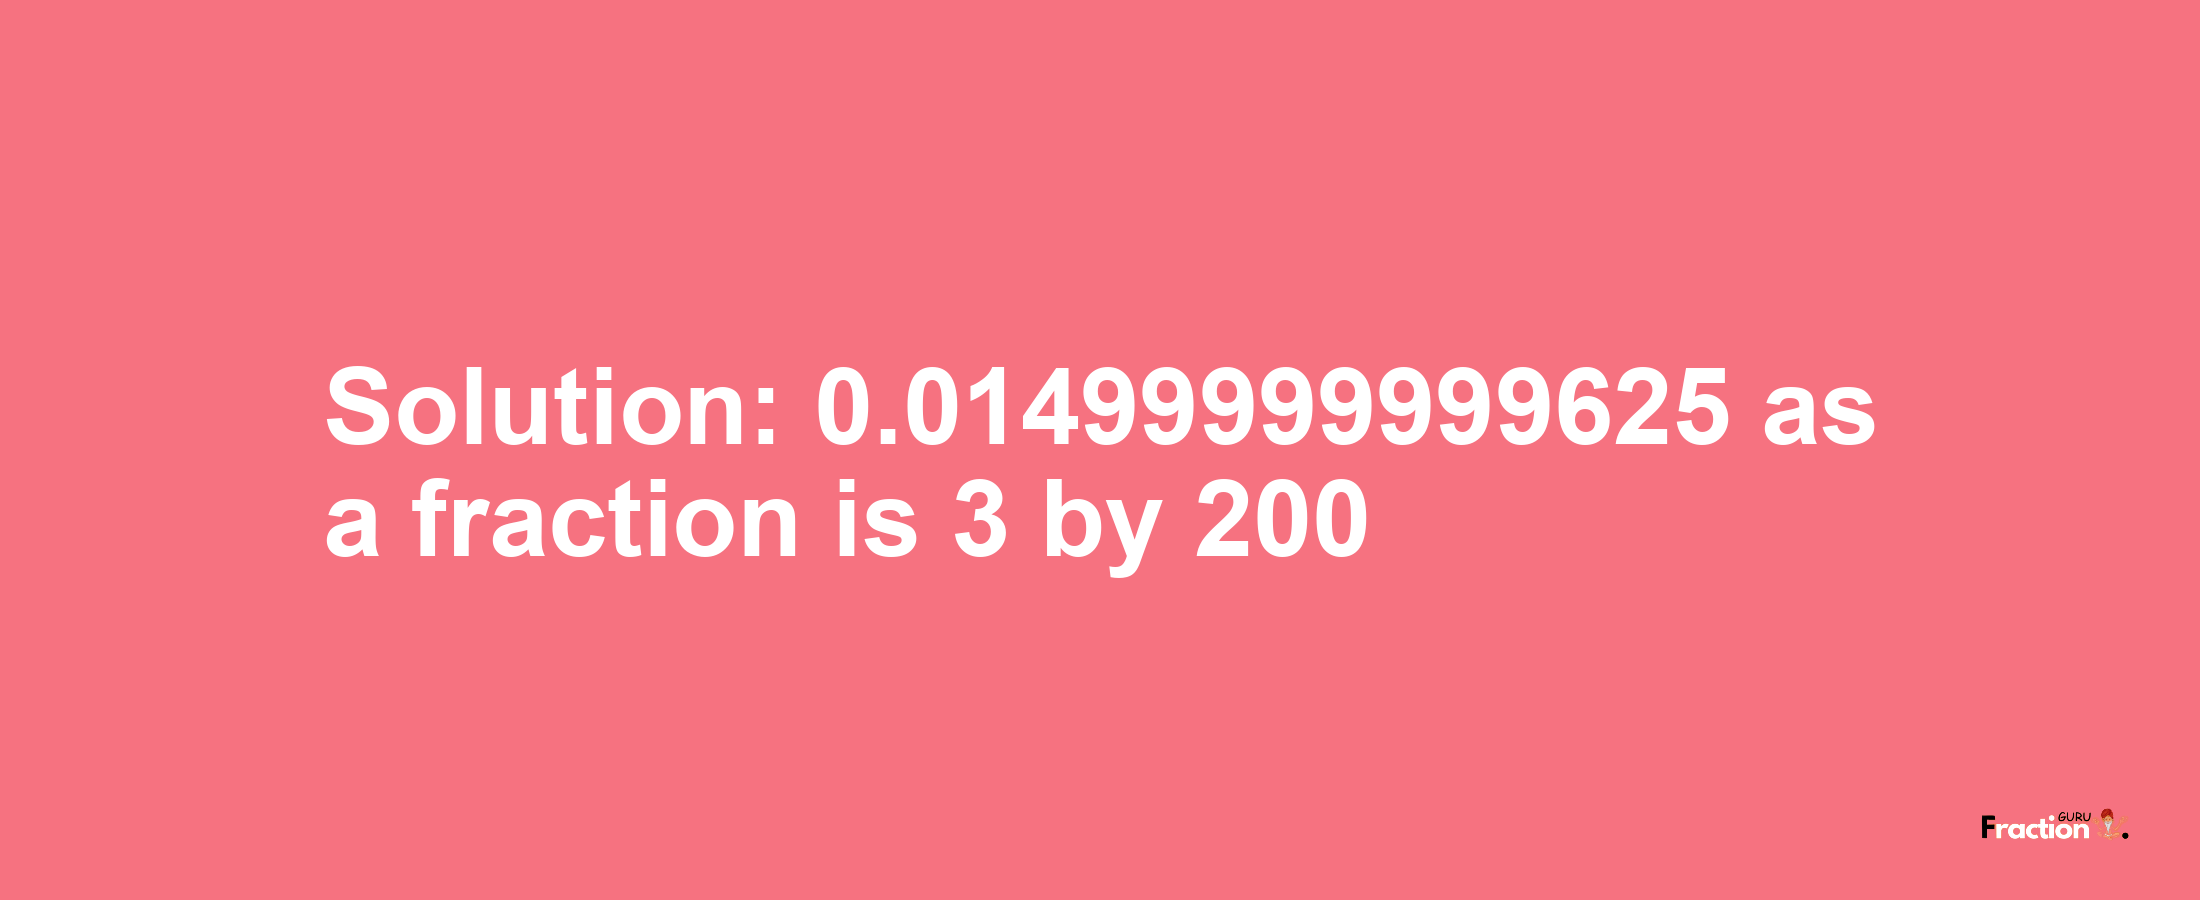 Solution:0.01499999999625 as a fraction is 3/200